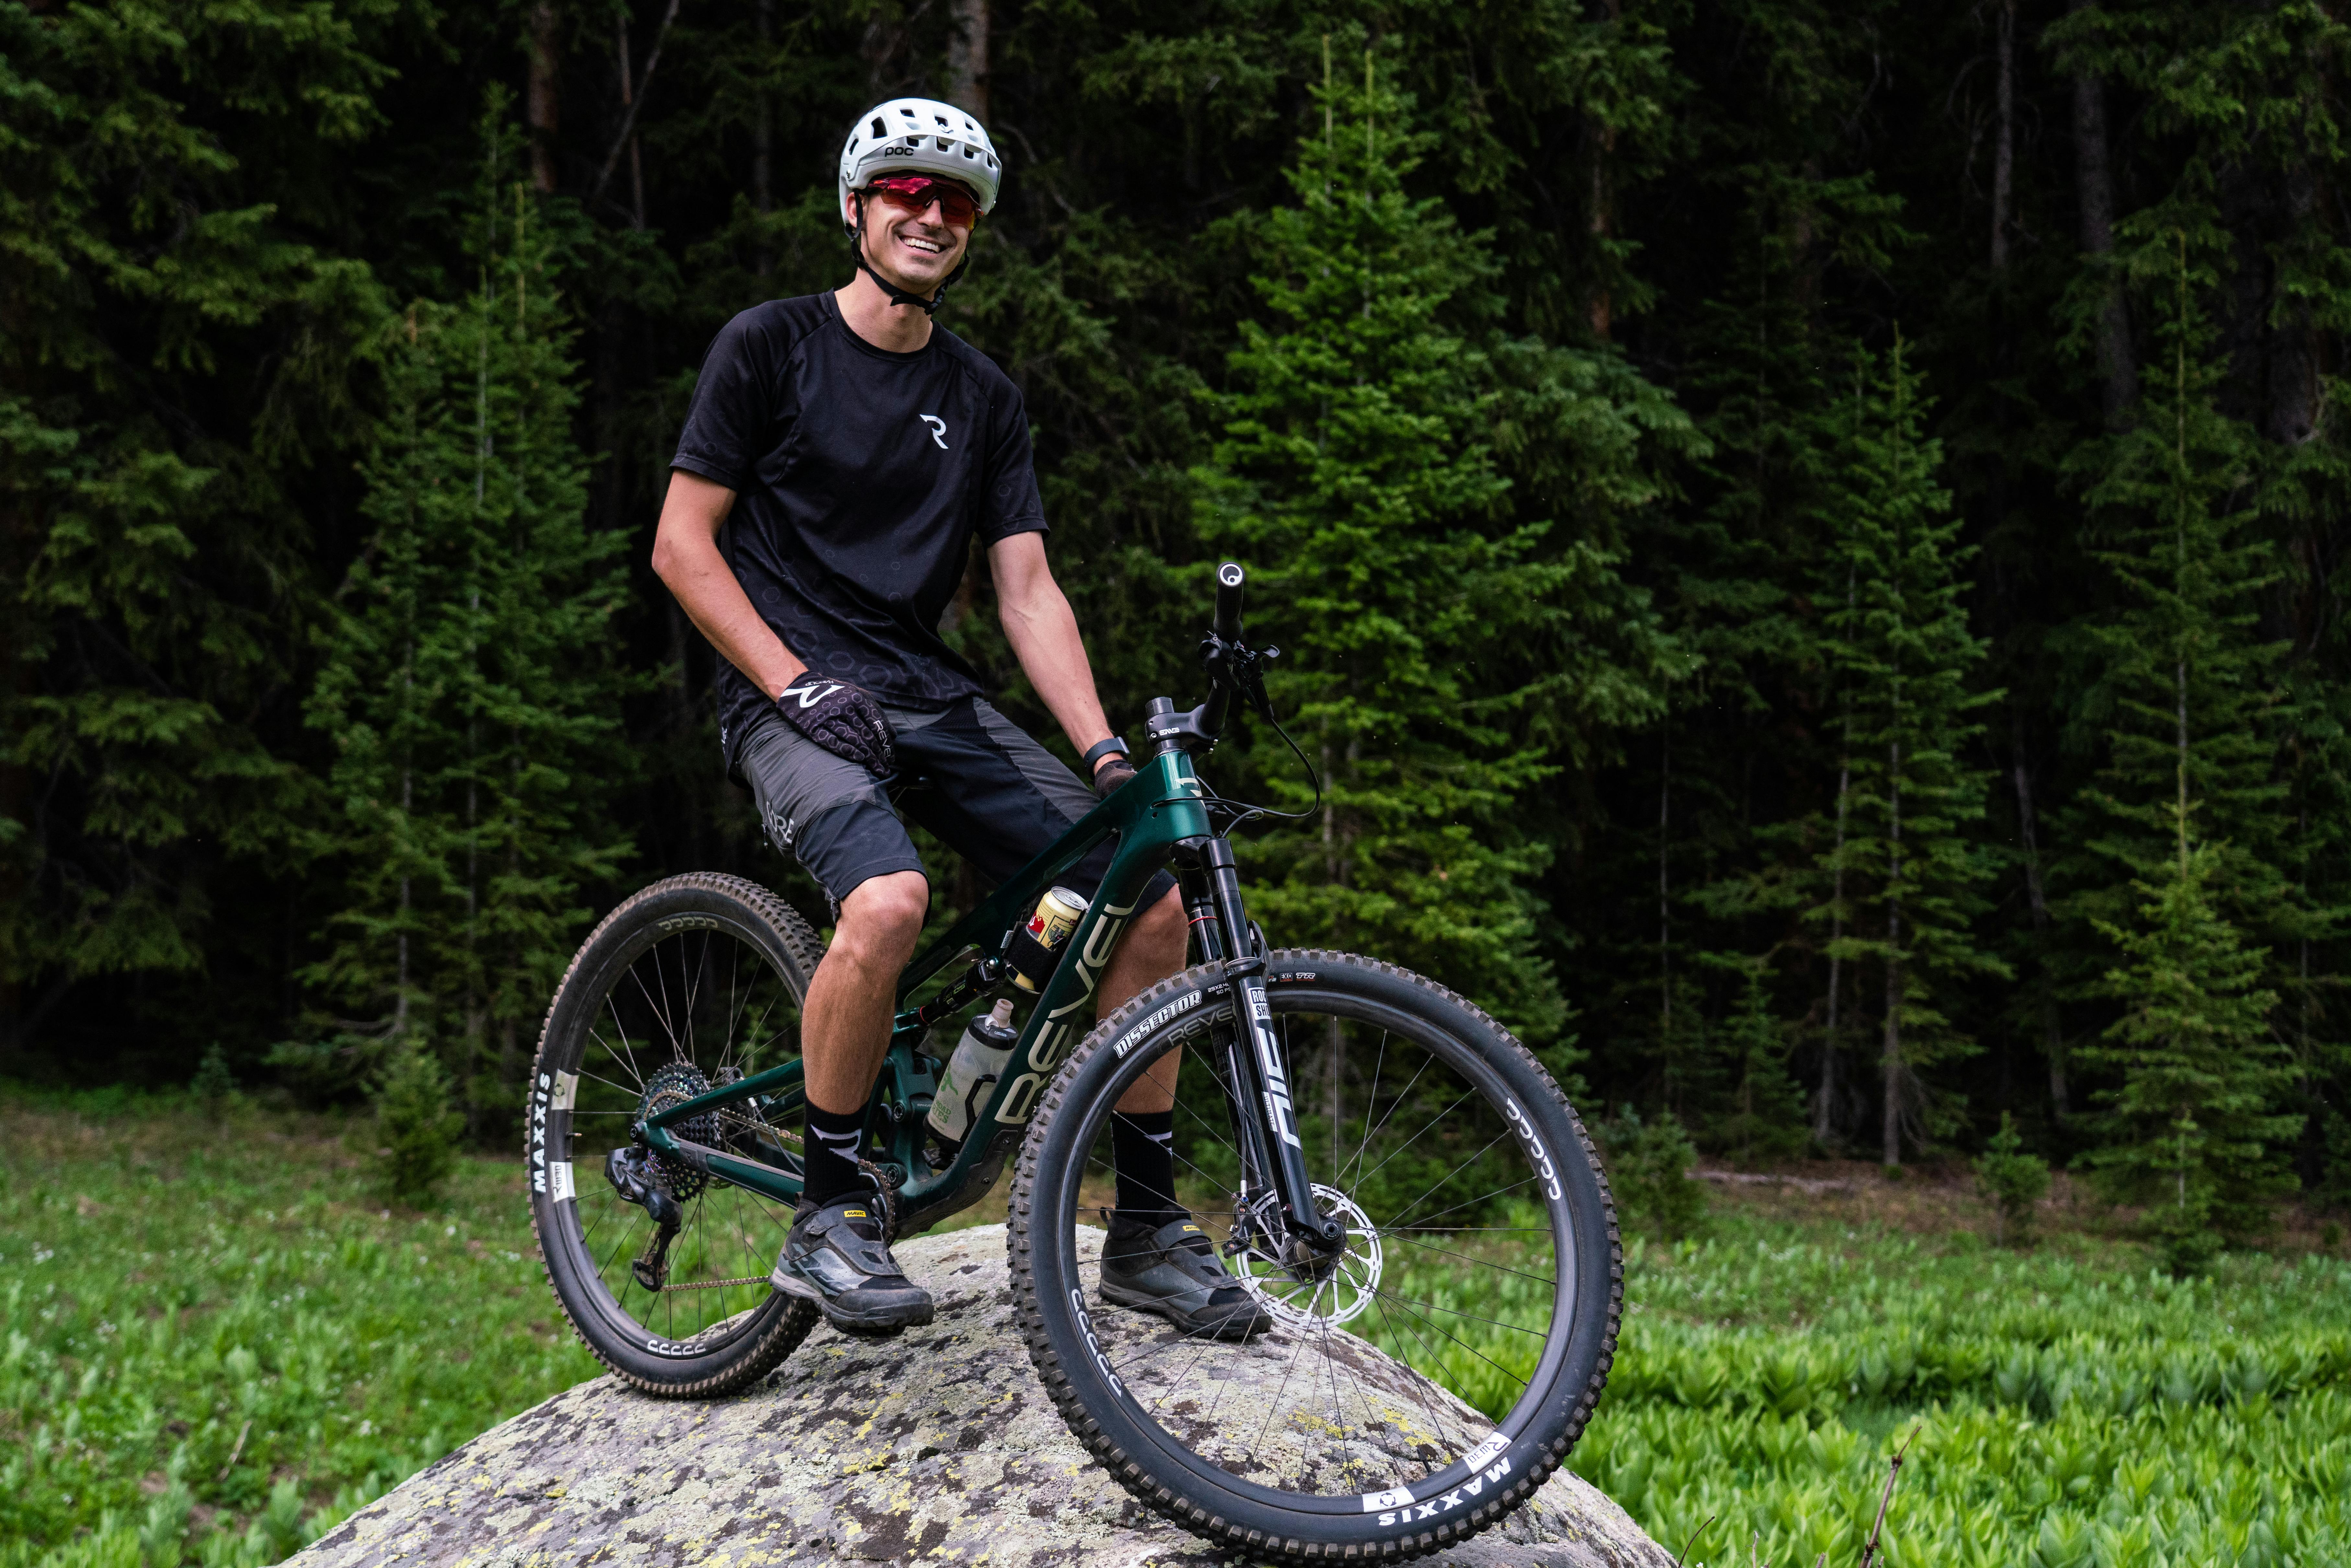 Revel Bikes Founder Adam Miller sitting on his mountain bike on a rock with a forest in the background.